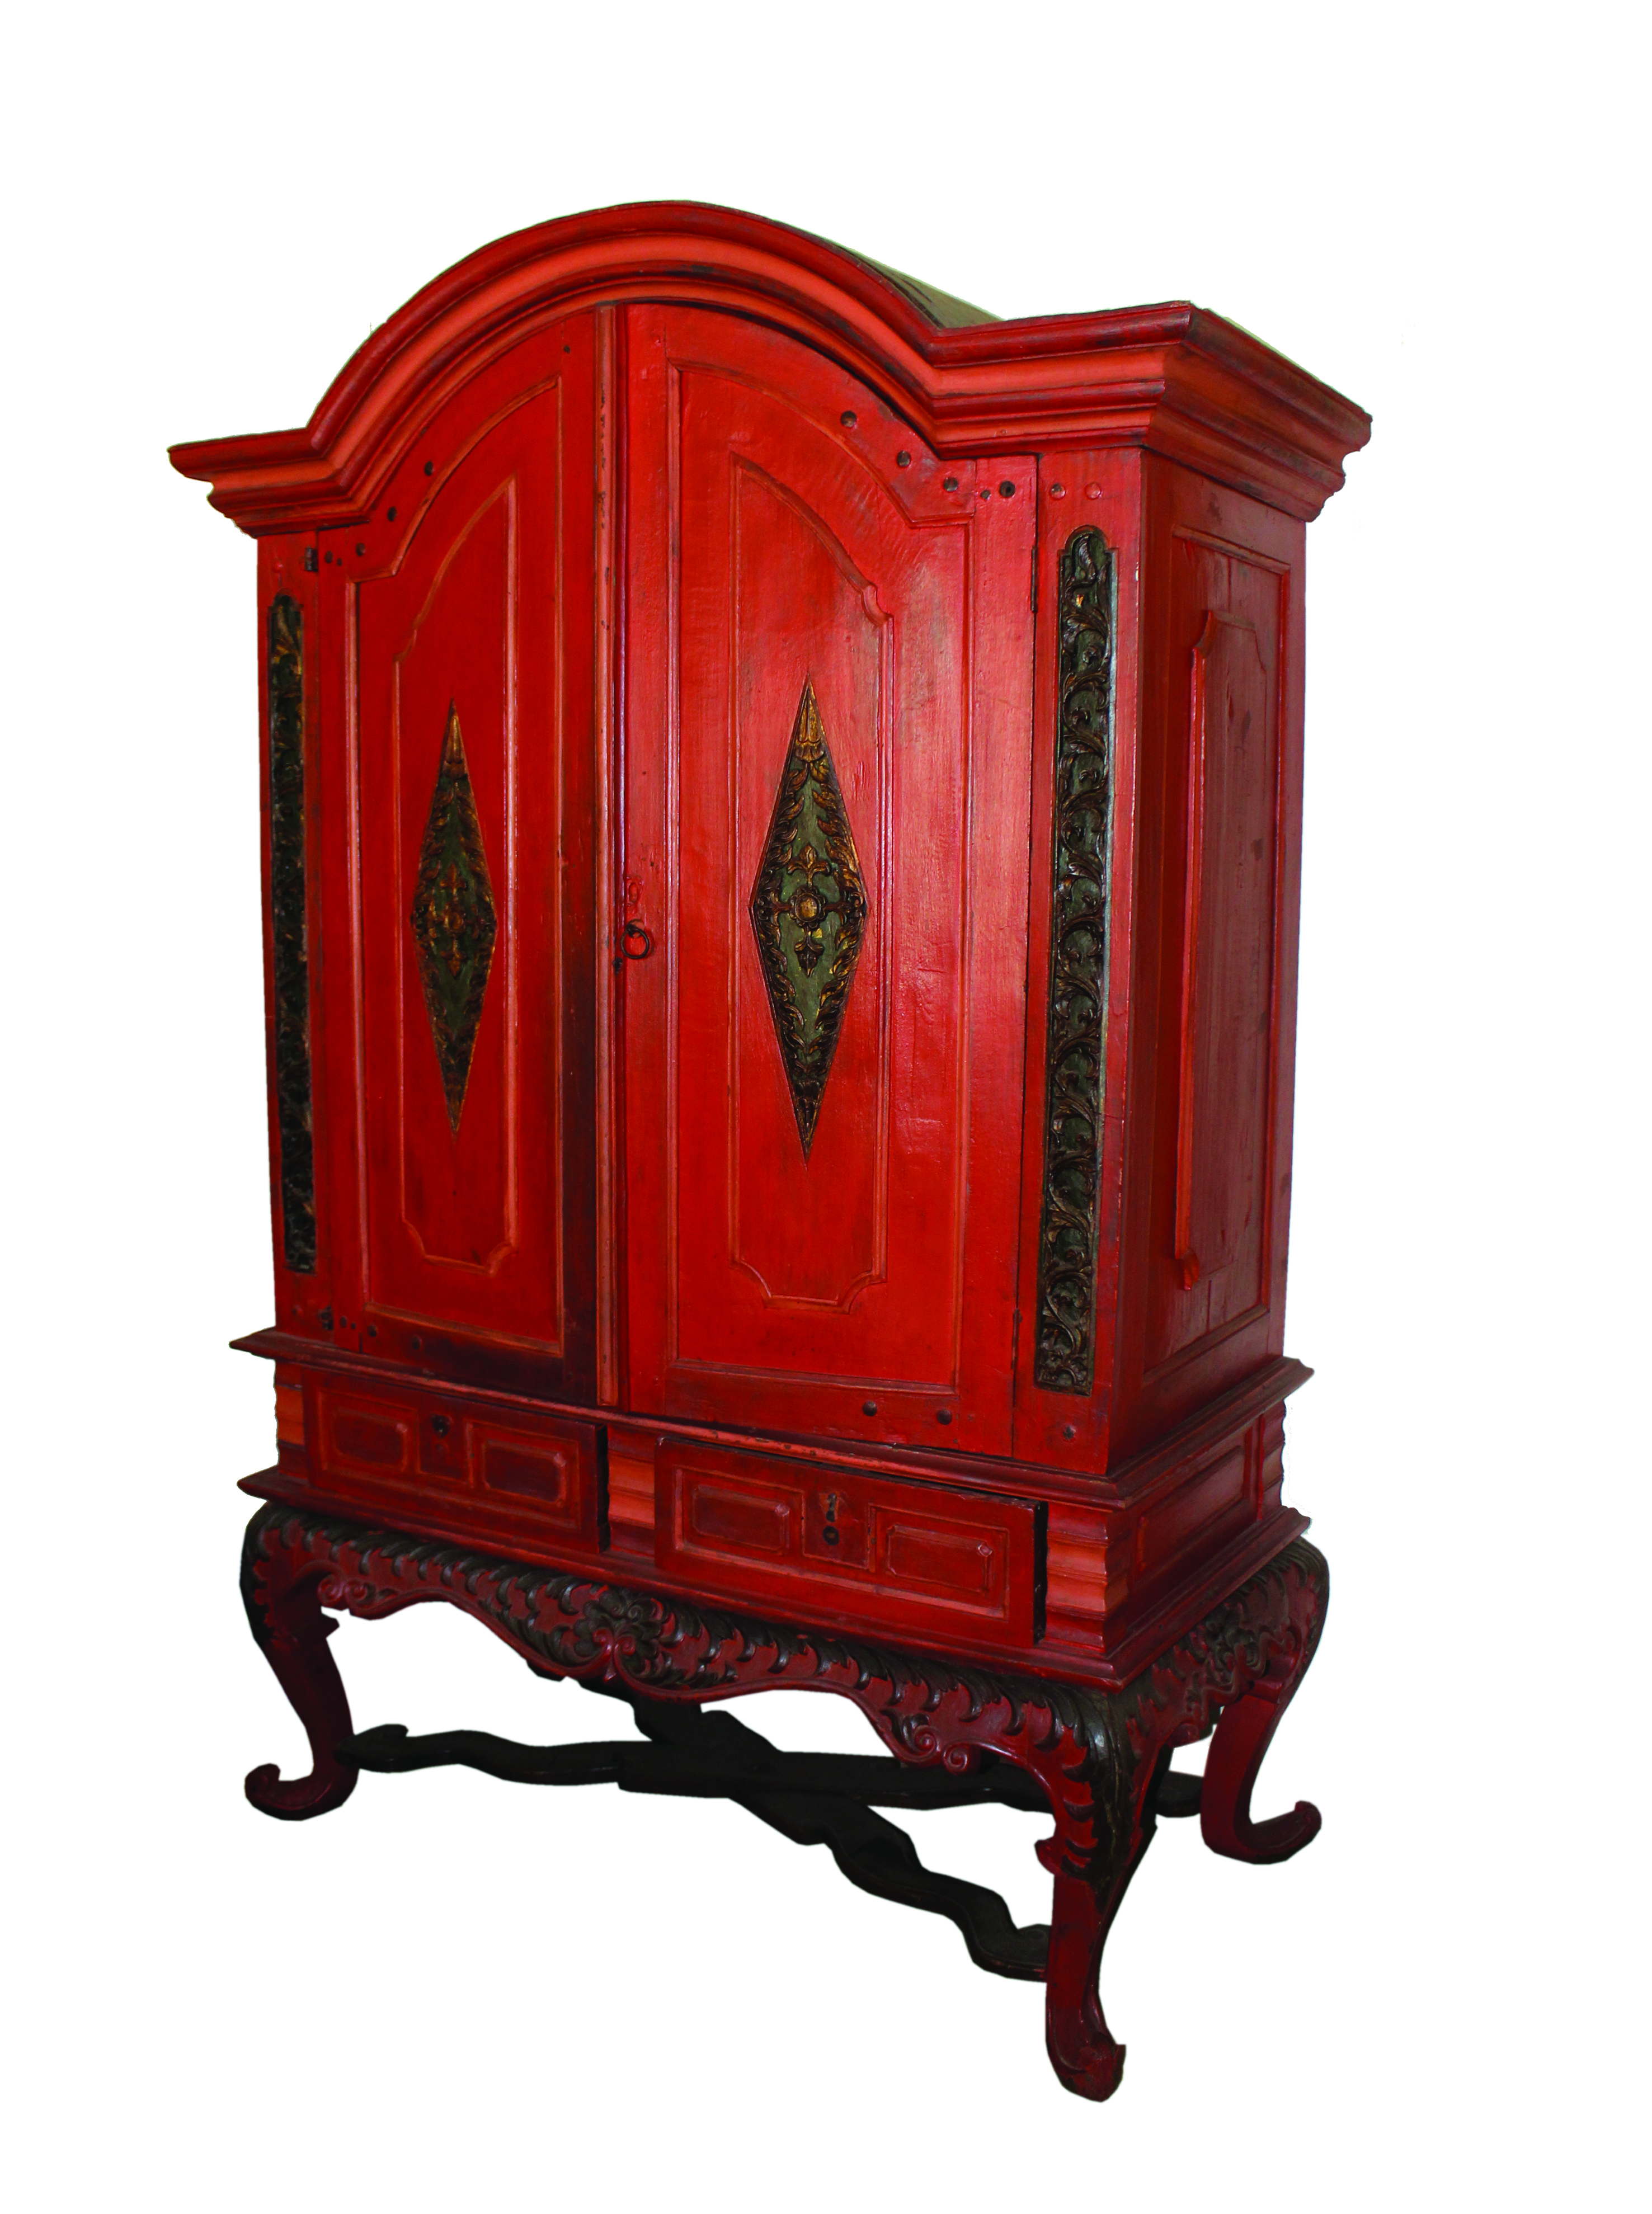 A red colonial wooden cabinet with two doors